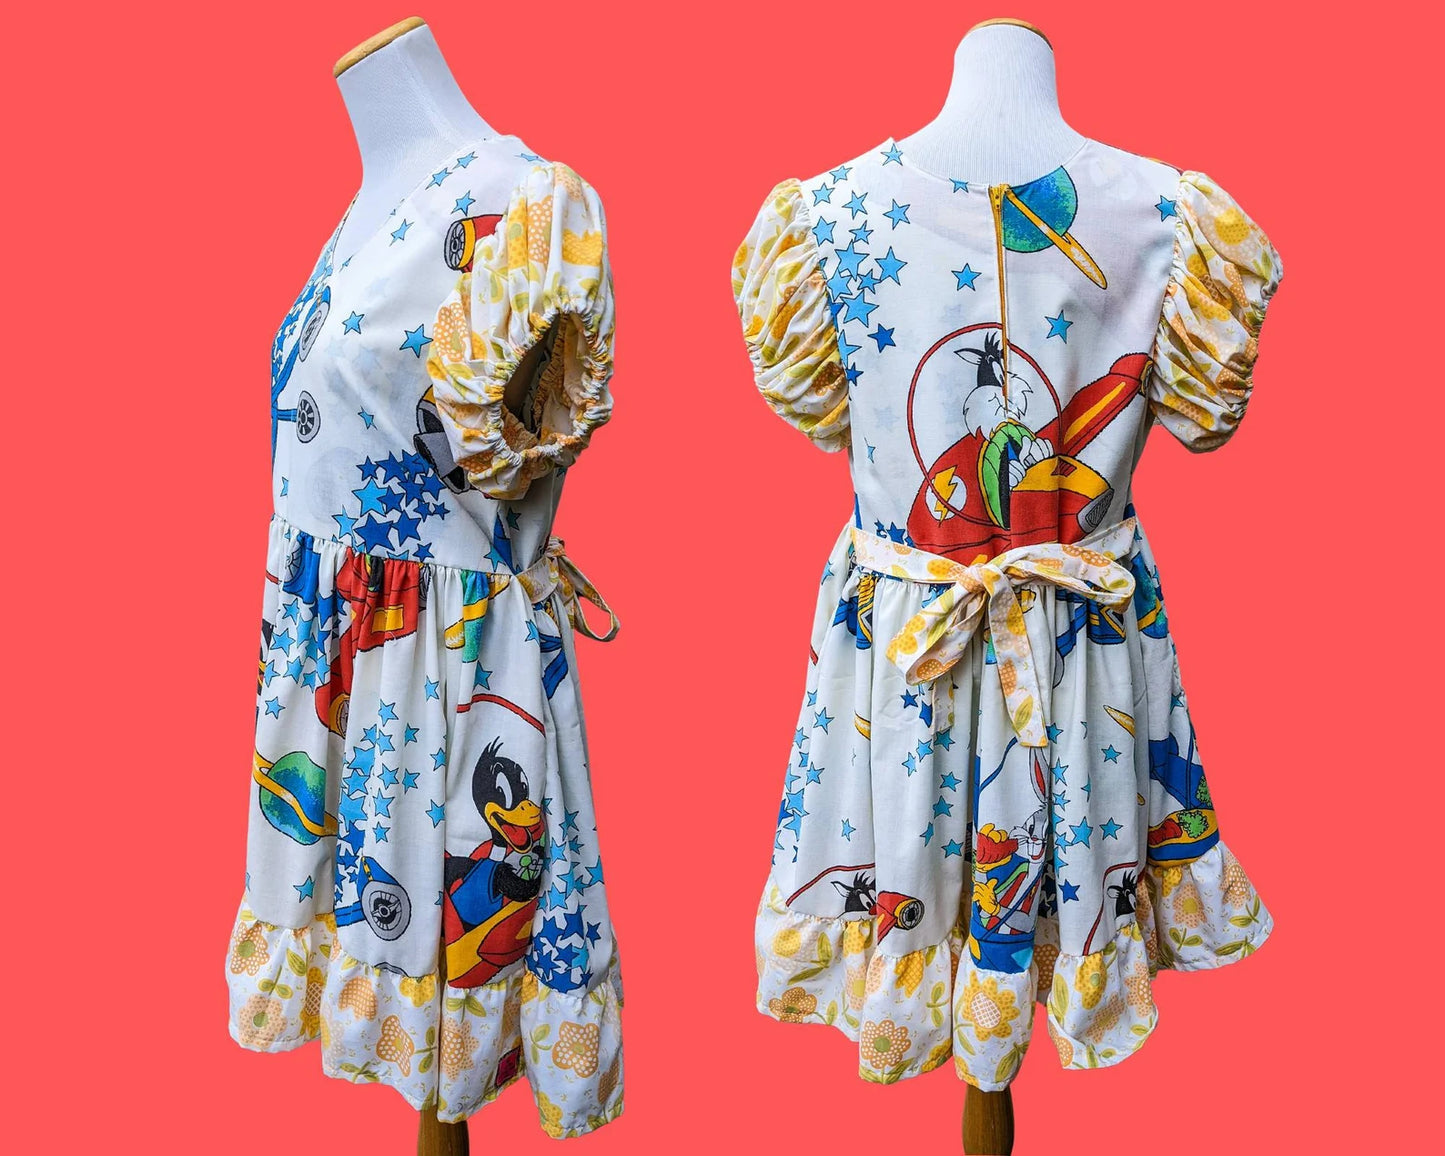 Handmade, Upcycled Vintage Looney Tunes Bedsheets Dress, Short Puffy Sleeves, Floral Pattern Size L-XL